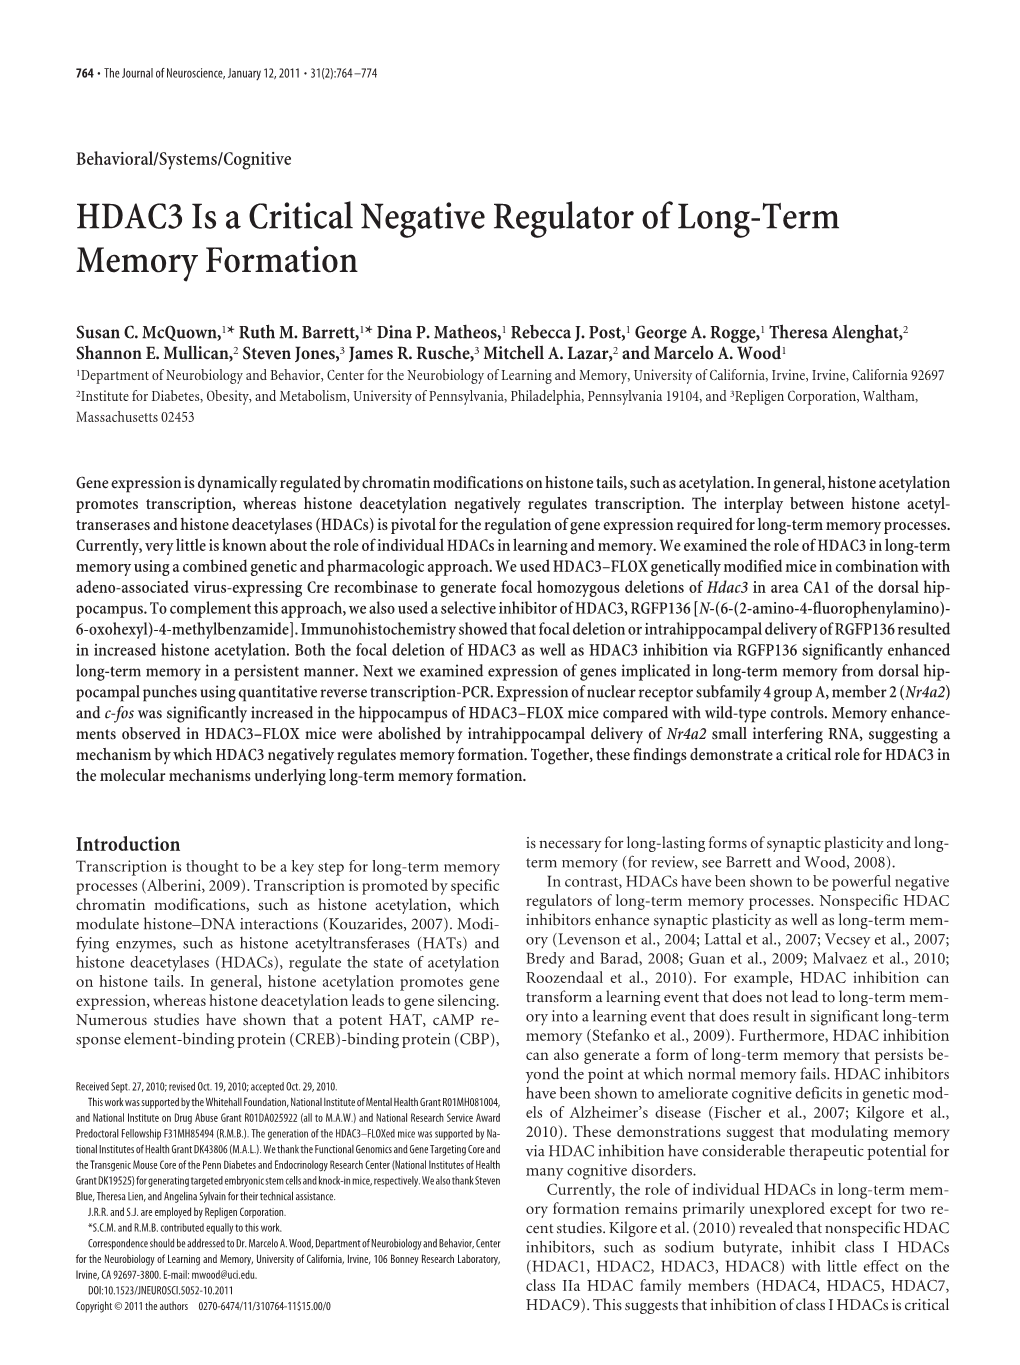 HDAC3 Is a Critical Negative Regulator of Long-Term Memory Formation